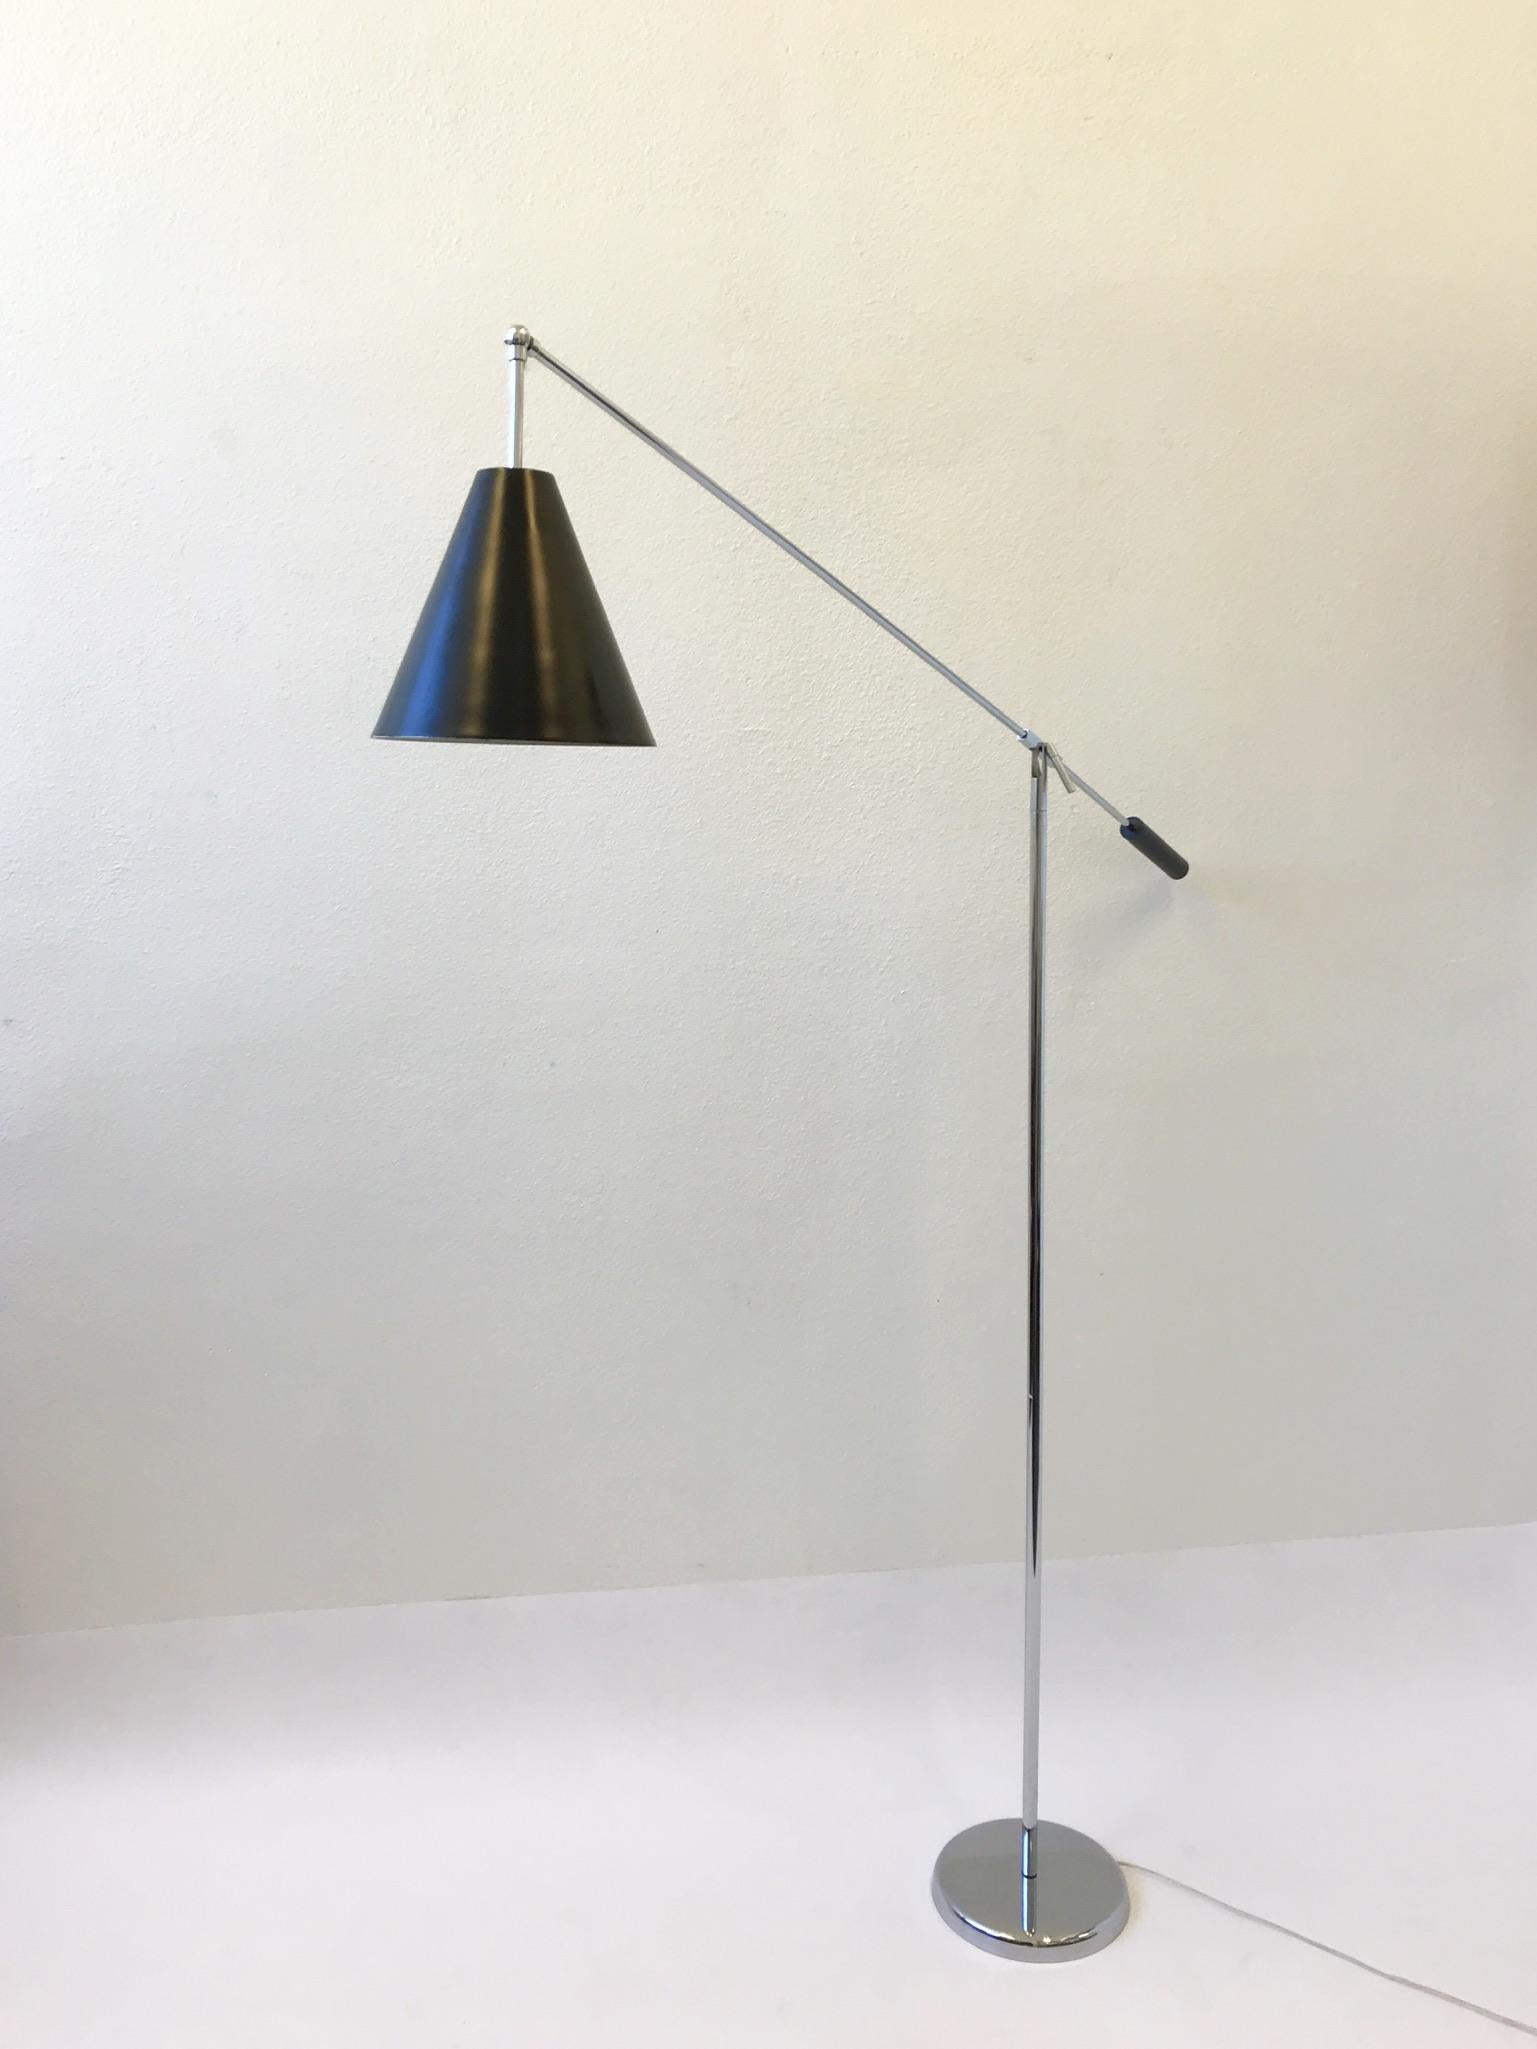 A beautiful polish chrome and black lacquered adjustable floor lamp by Robert Sonneman. The lamp has been newly rewired, but the chrome and the lacquered is in original condition. The lamp shows some minor wear. The arm can be adjusted up and down